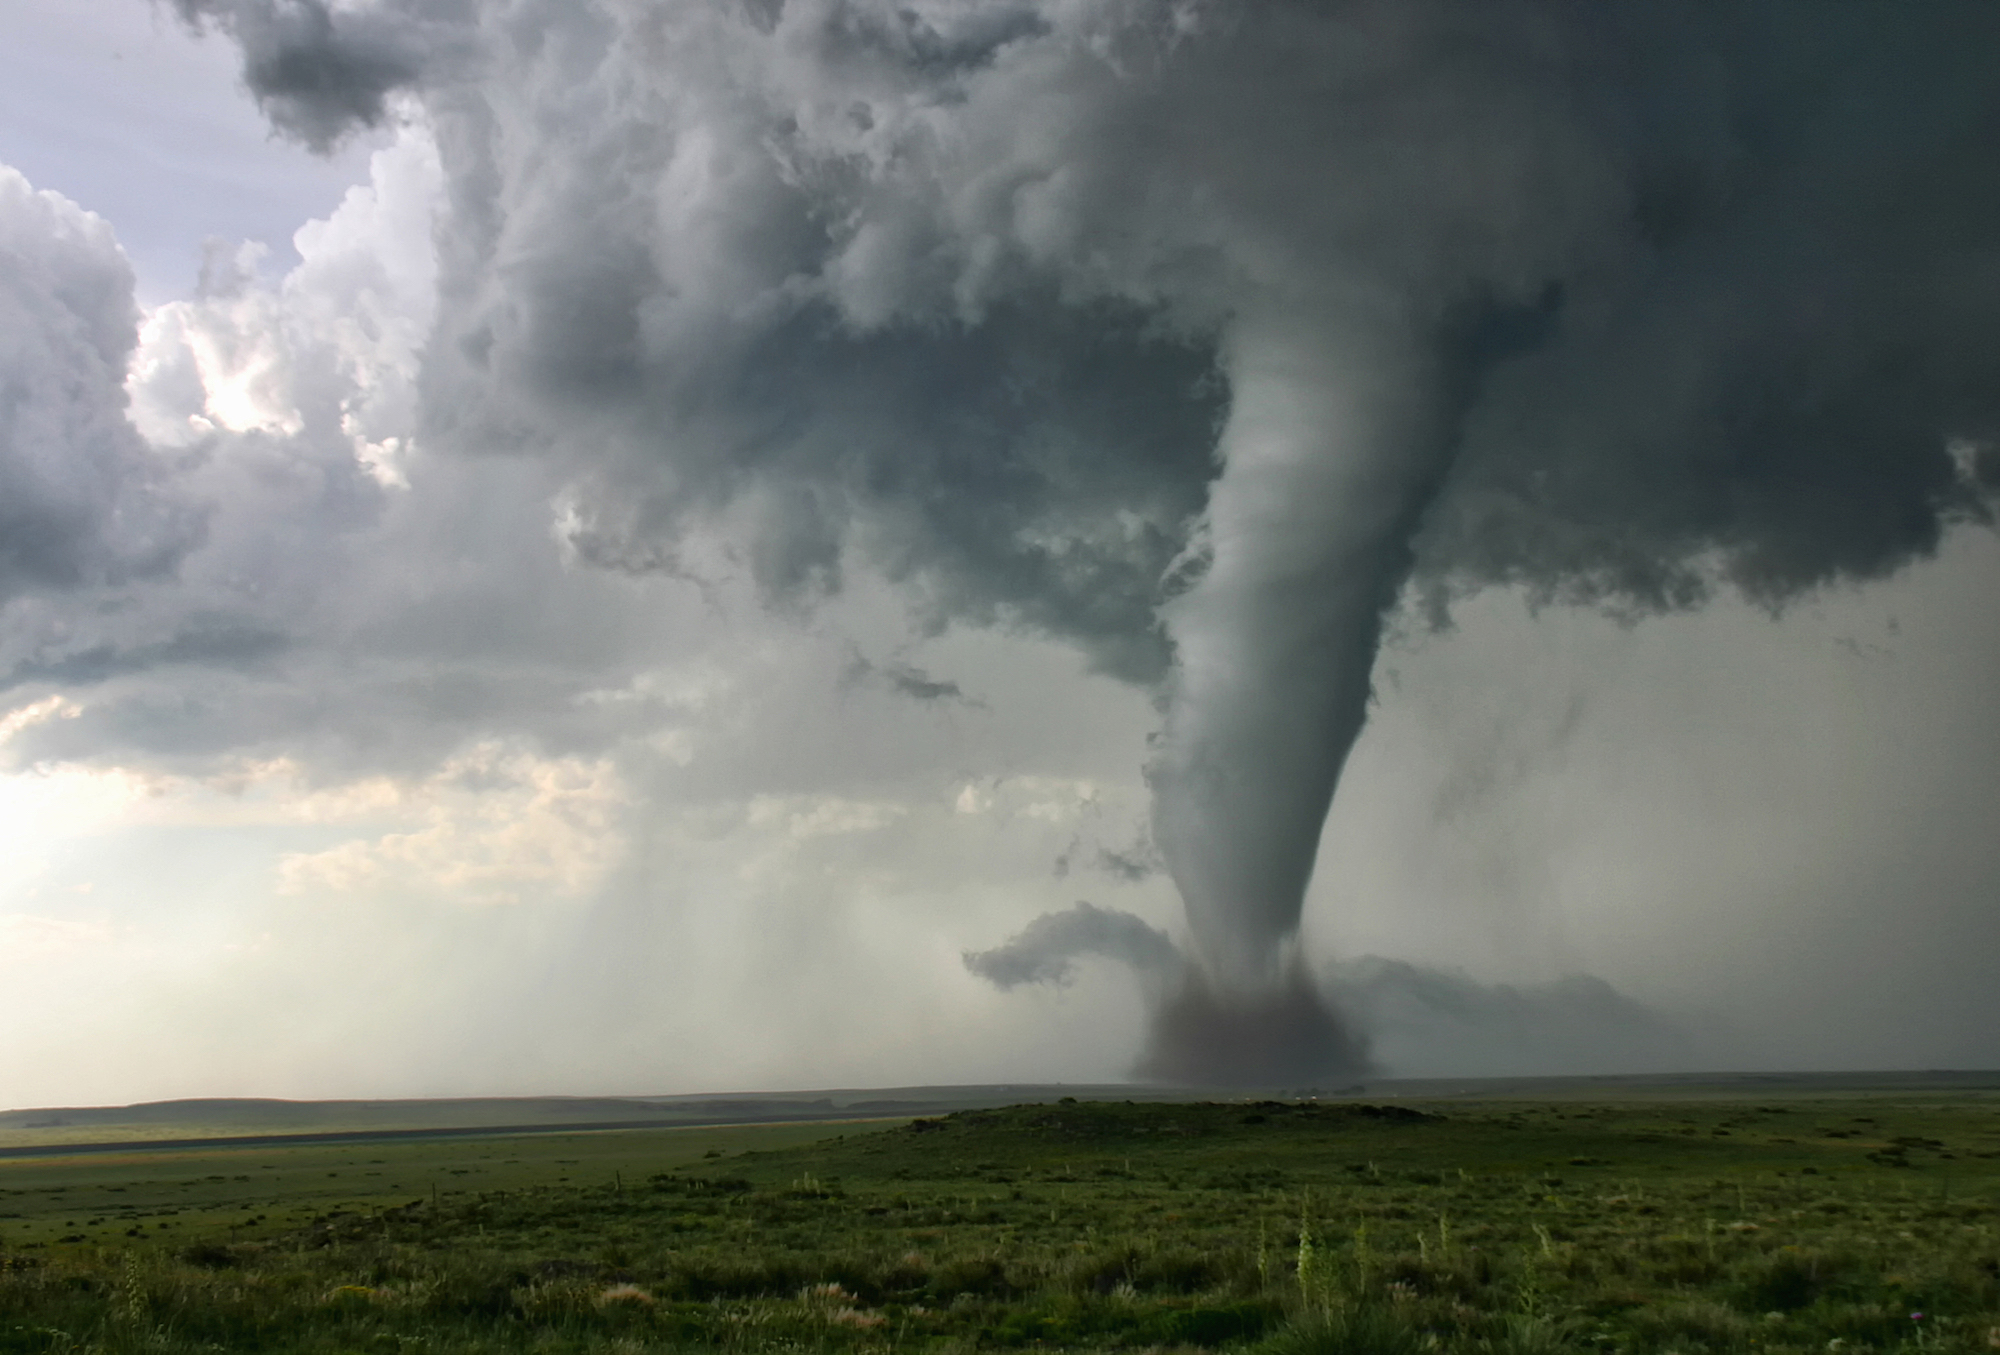 How do tornadoes and hurricanes compare?